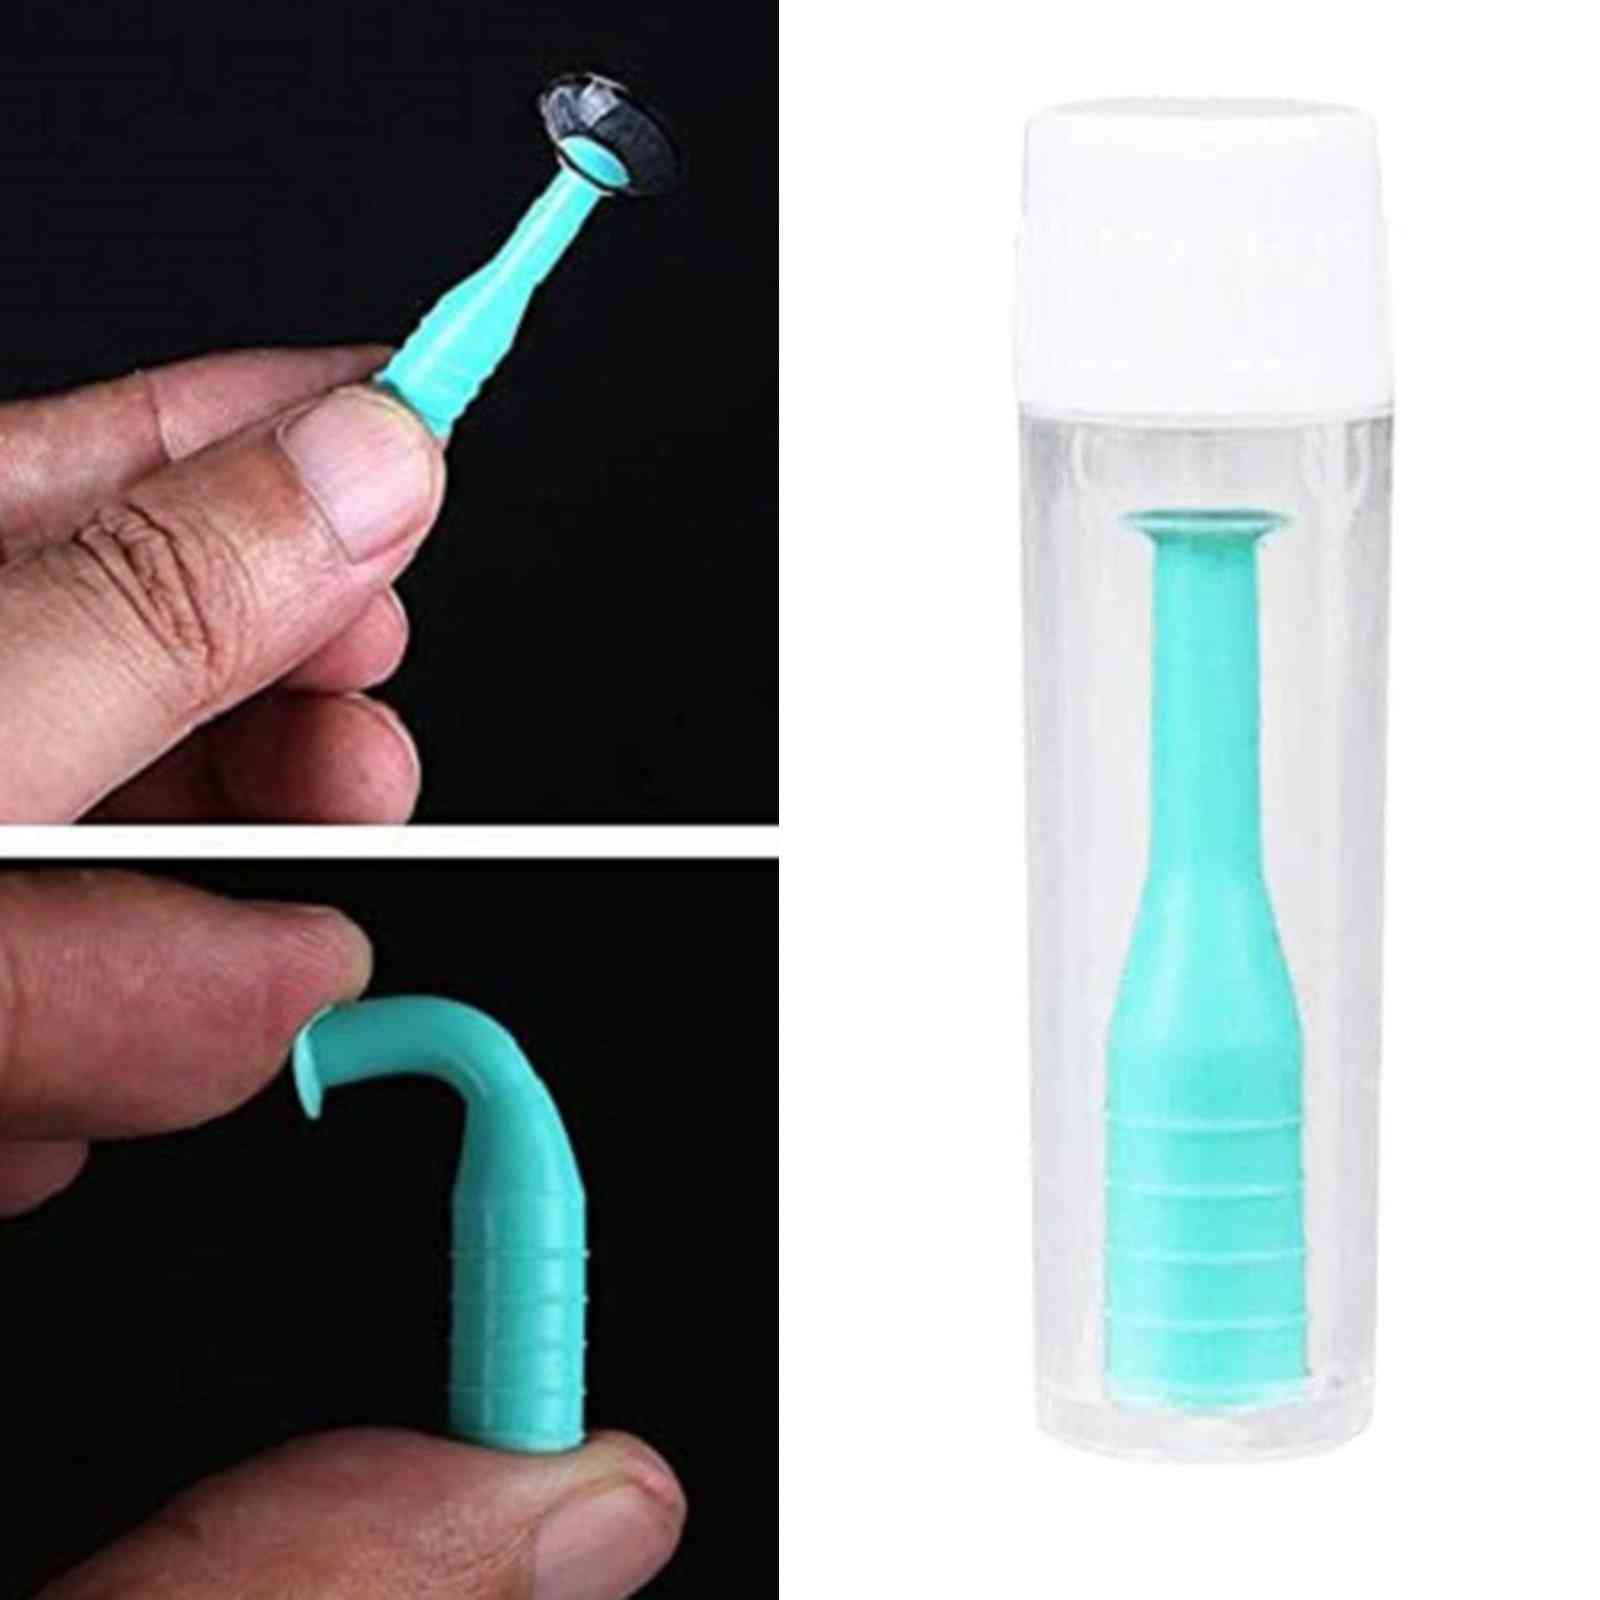 Hard Contact Lens Remover/insertion Tool